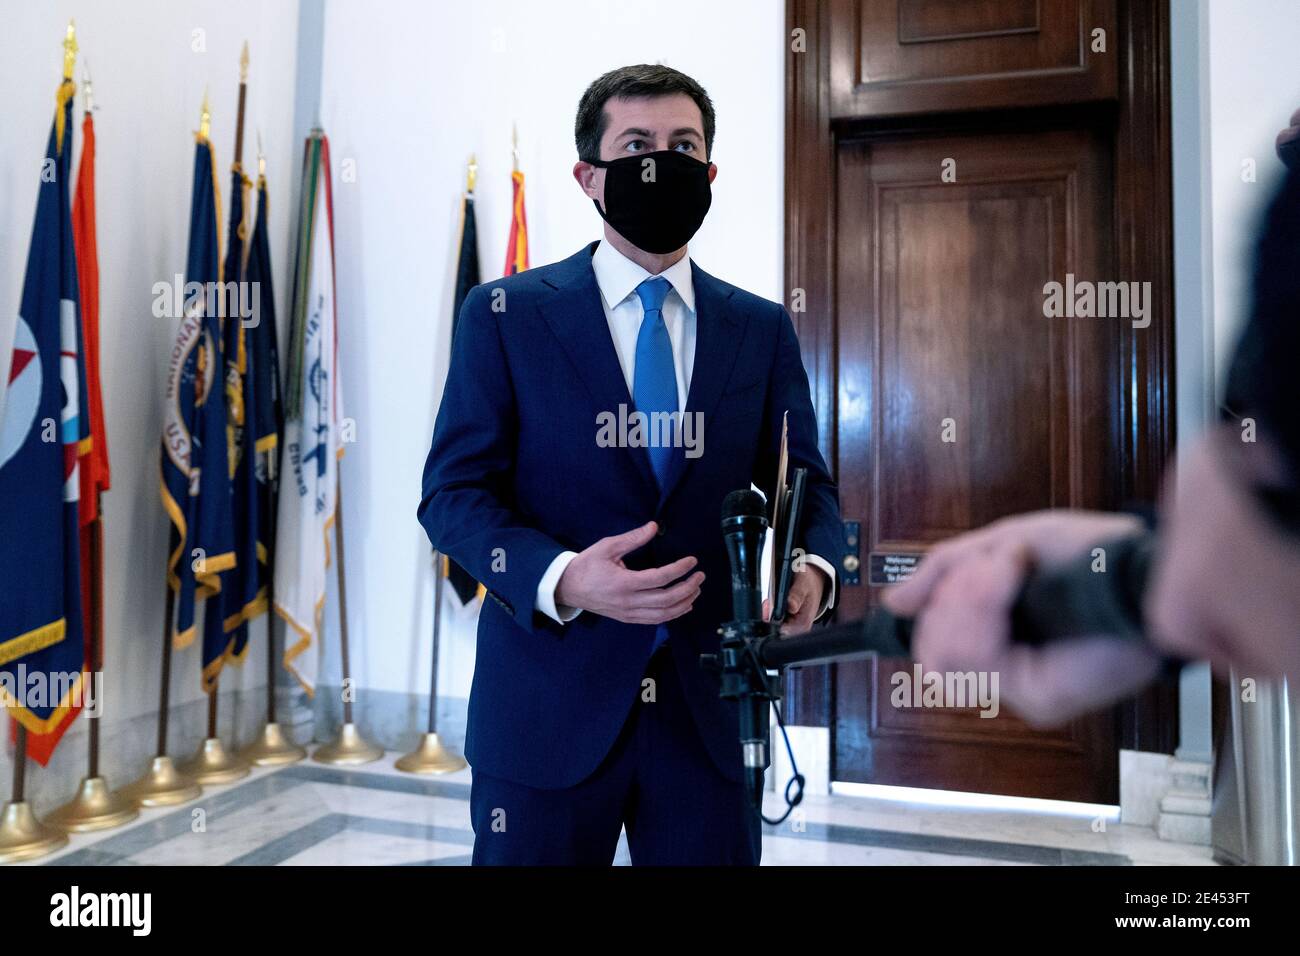 Pete Buttigieg, U.S. secretary of transportation nominee for U.S. President Joe Biden, wears a protective mask while speaking to members of the media after a Senate Commerce, Science and Transportation Committee confirmation hearing in Washington, DC, U.S., on Thursday, Jan. 21, 2021. Buttigieg, is pledging to carry out the administration's ambitious agenda to rebuild the nation's infrastructure, calling it a 'generational opportunity' to create new jobs, fight economic inequality and stem climate change. Credit: Stefani Reynolds/Pool via CNP | usage worldwide Stock Photo